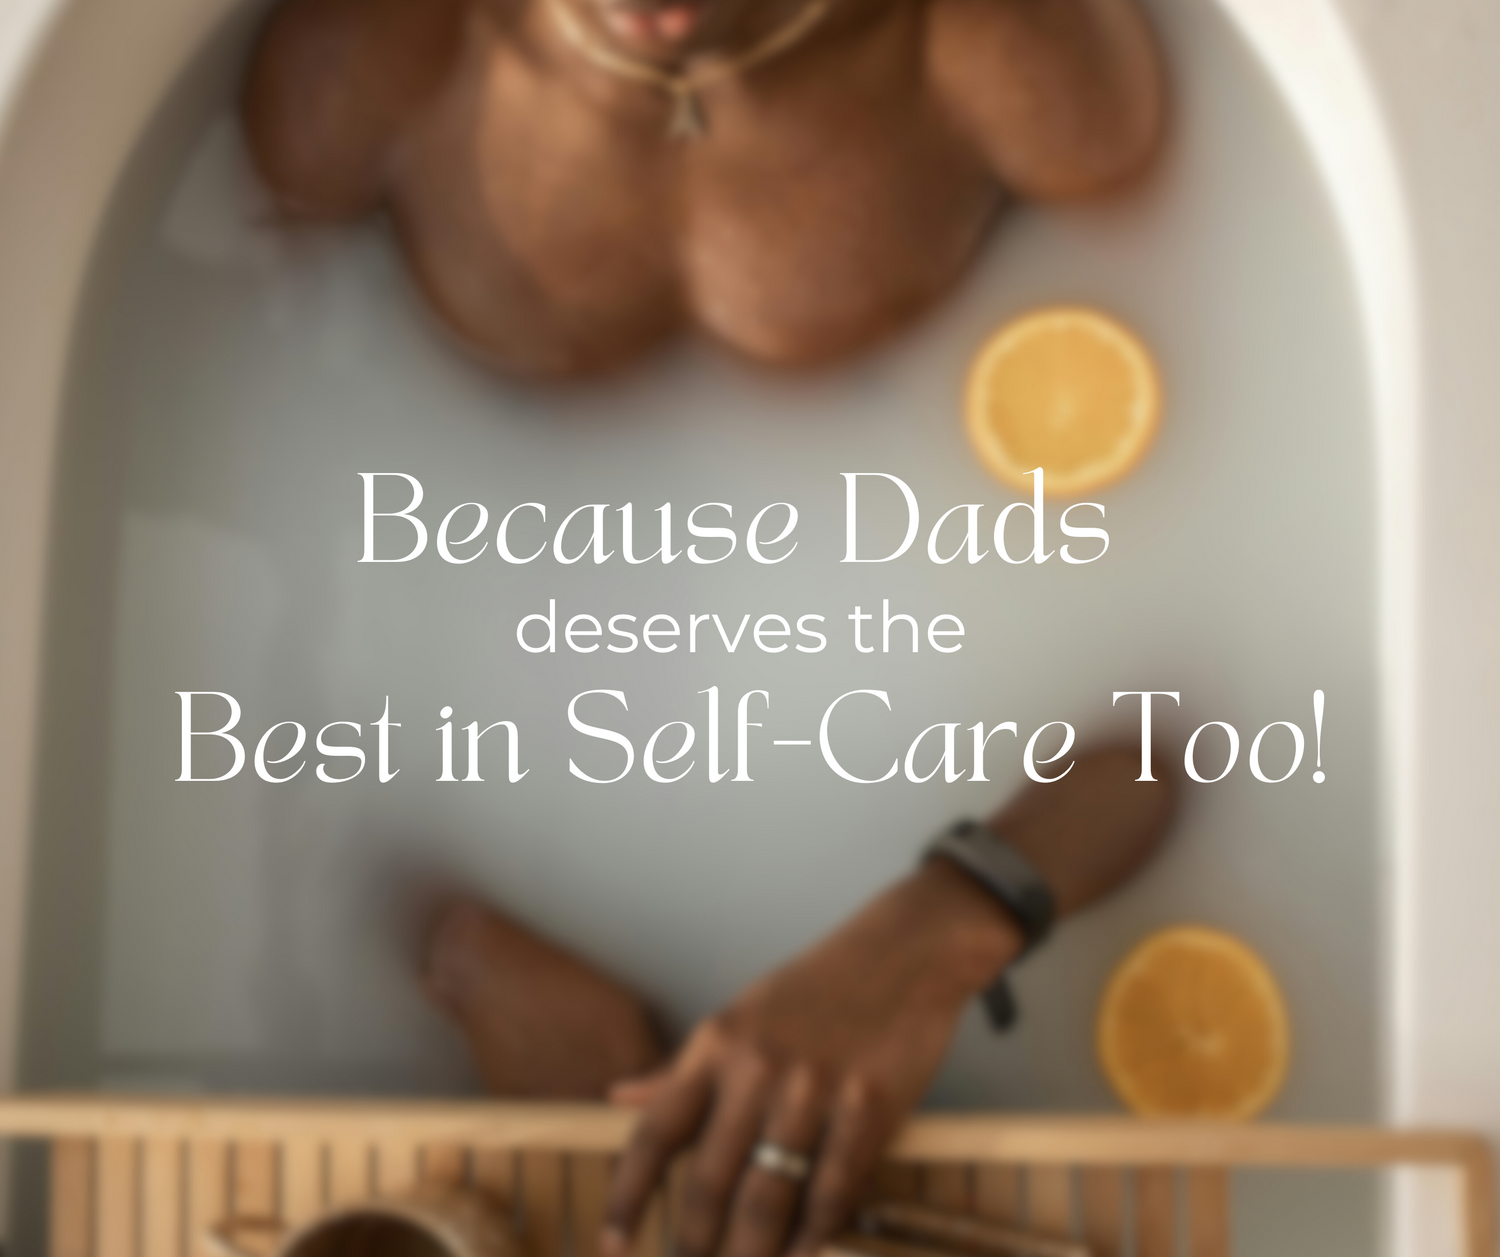 Dads Deserve the Best in Self-Care Too!